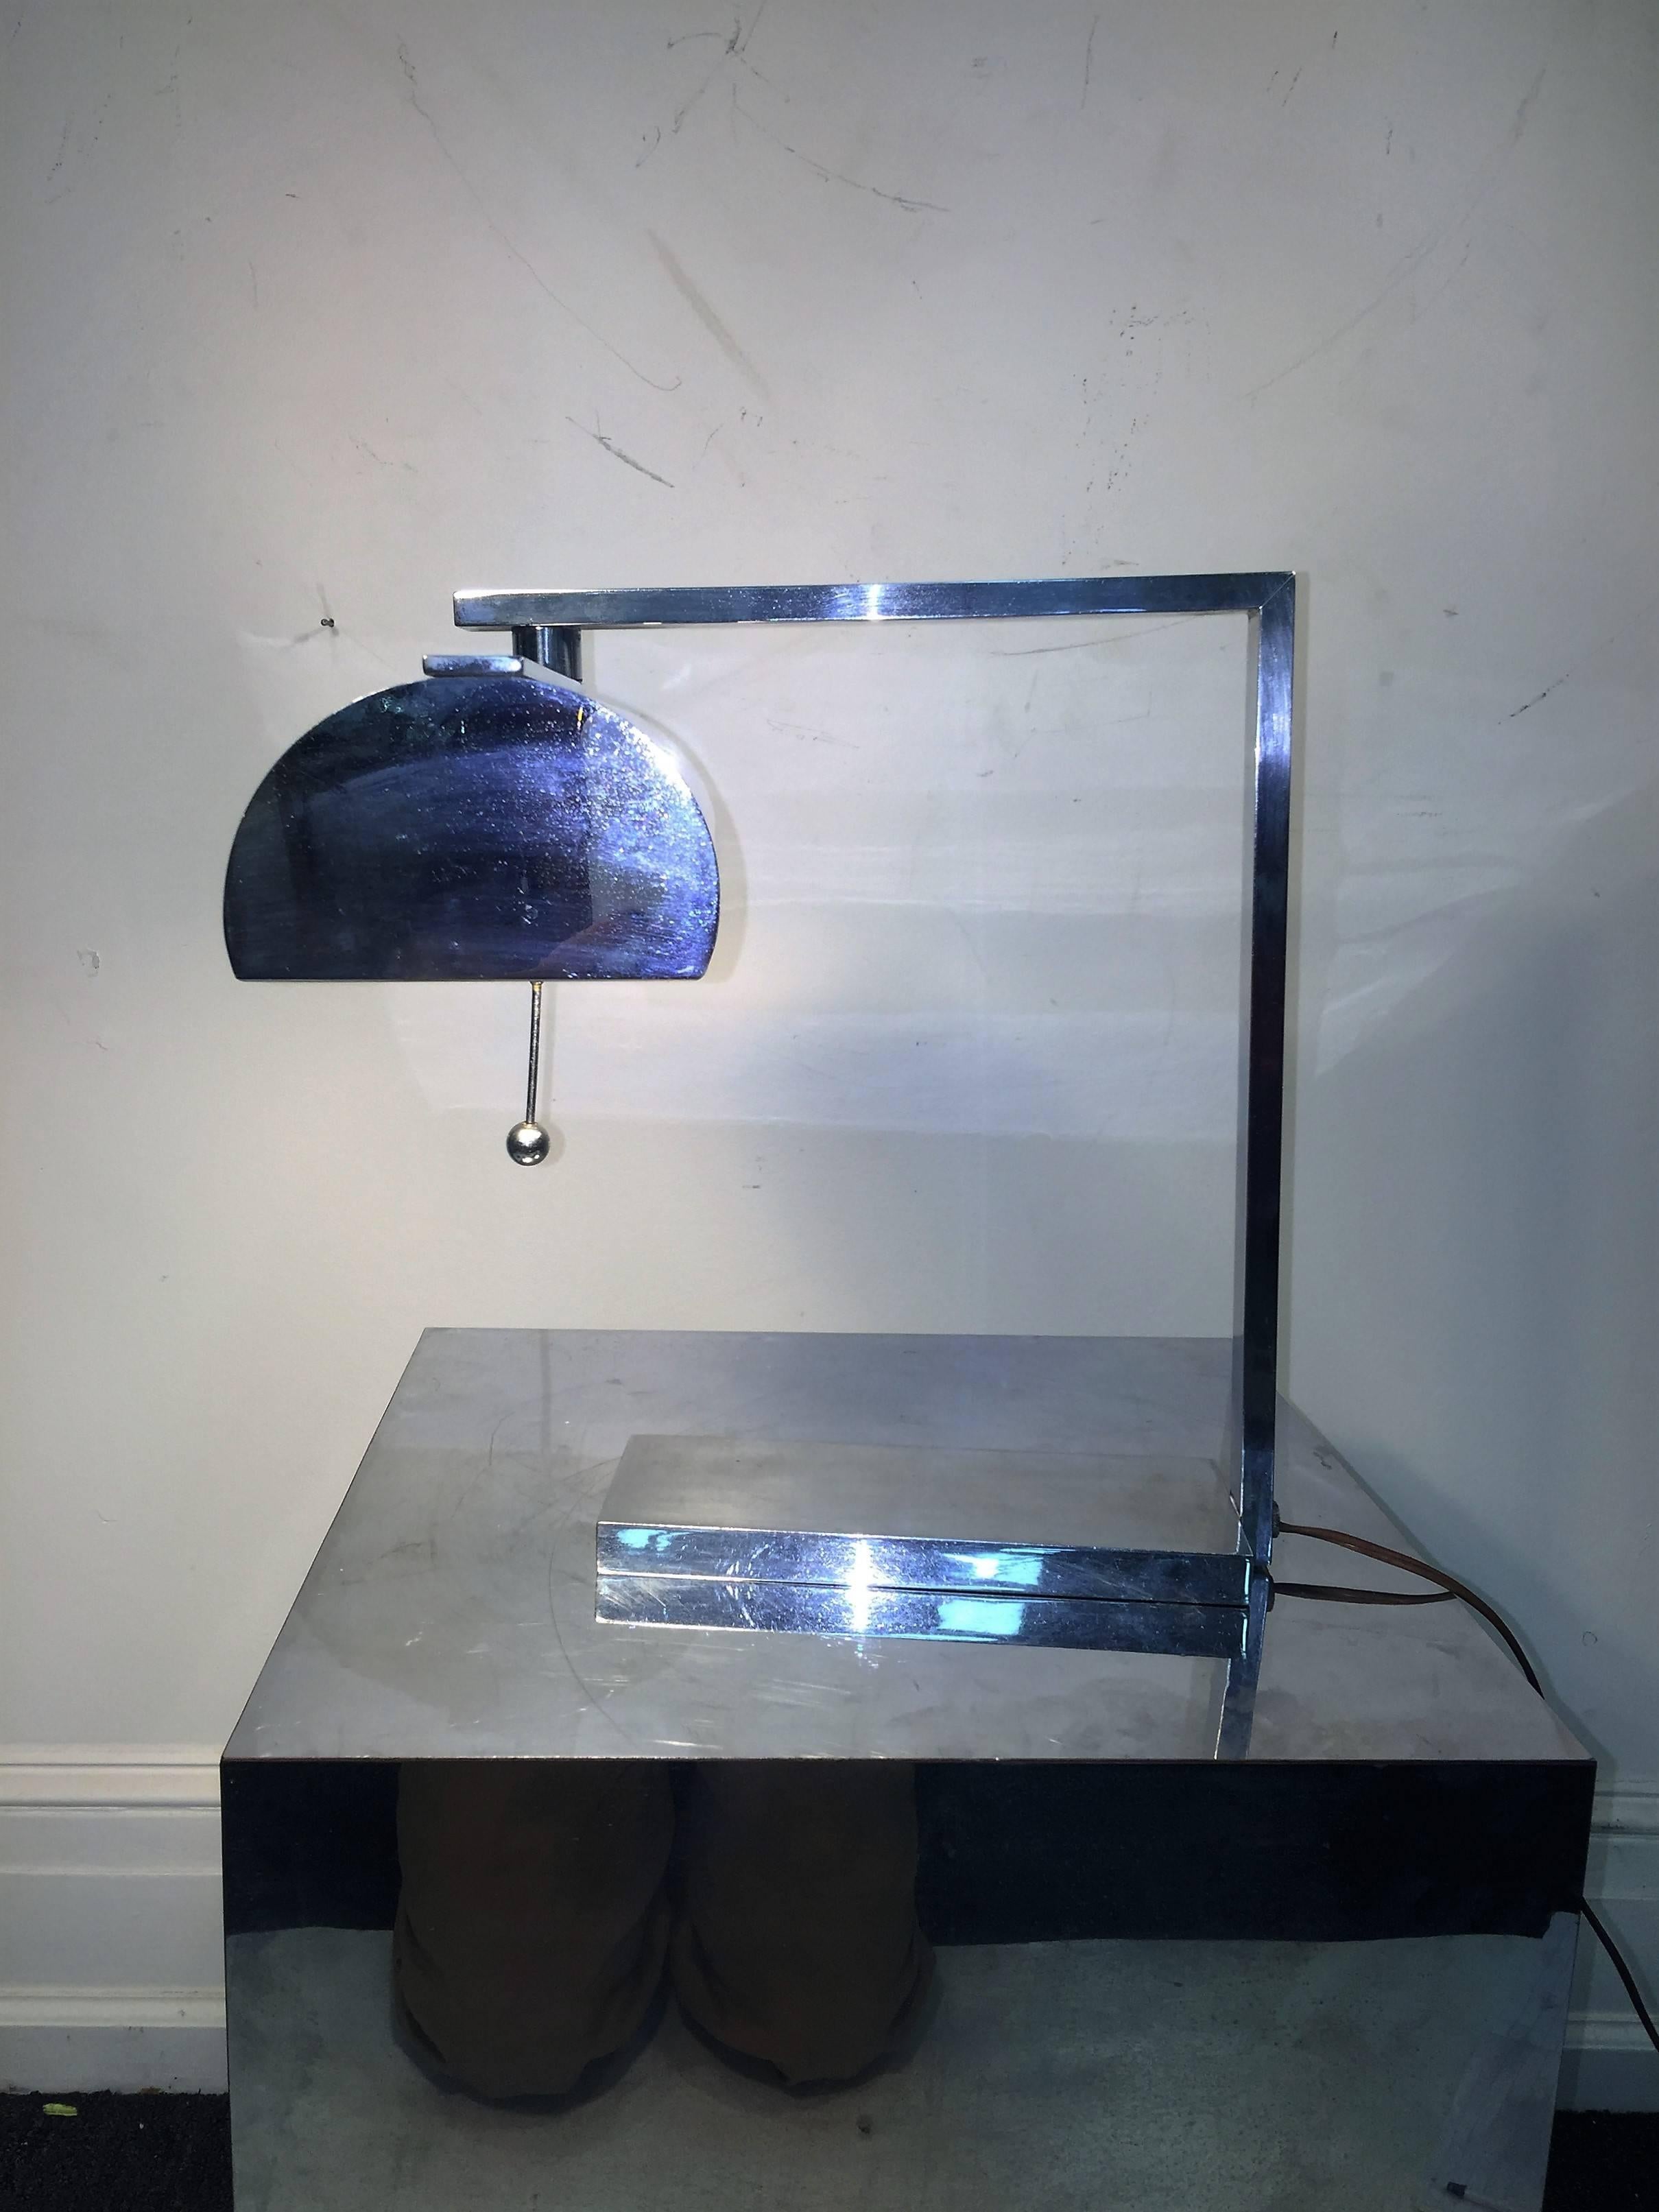 Spectacular Modernist Art Deco Desk Lamp by Donald Deskey In Excellent Condition For Sale In Mount Penn, PA